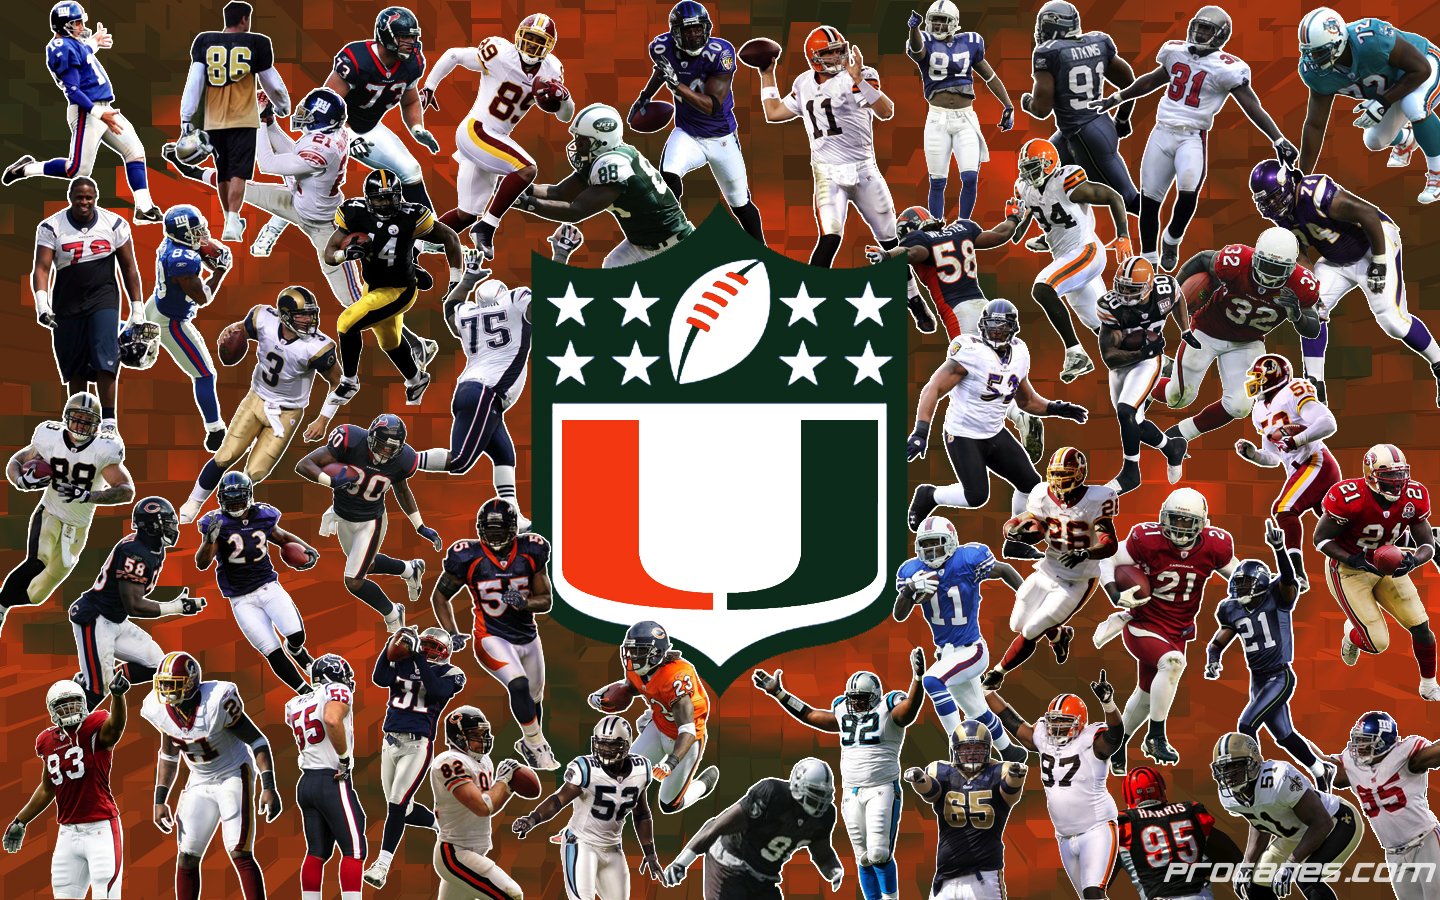 Miami Hurricanes Football Players That Will Be Drafted in the 2012